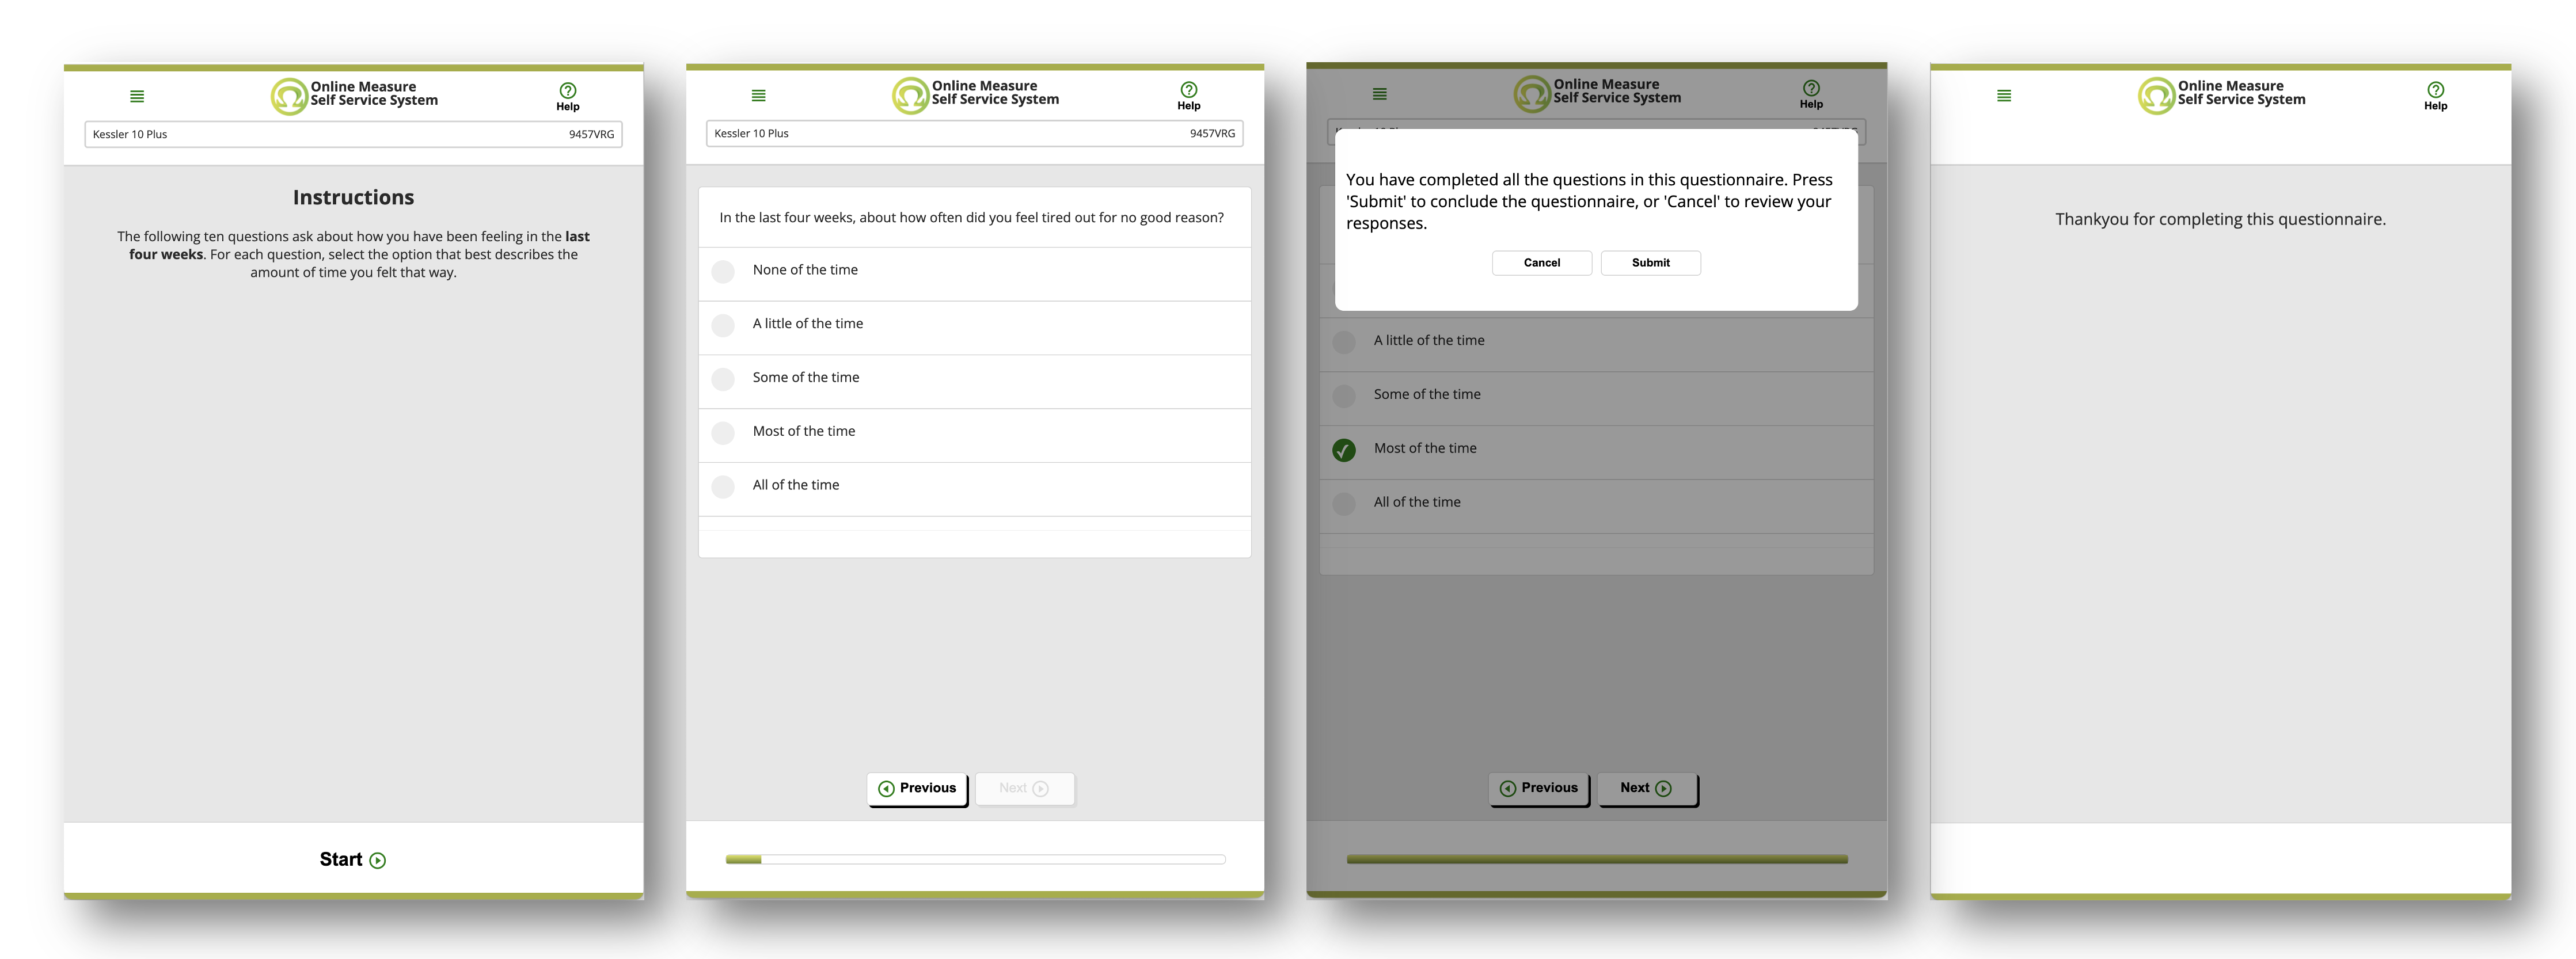 Example Client Data Generate Collection Occasion Self Service Measure screen